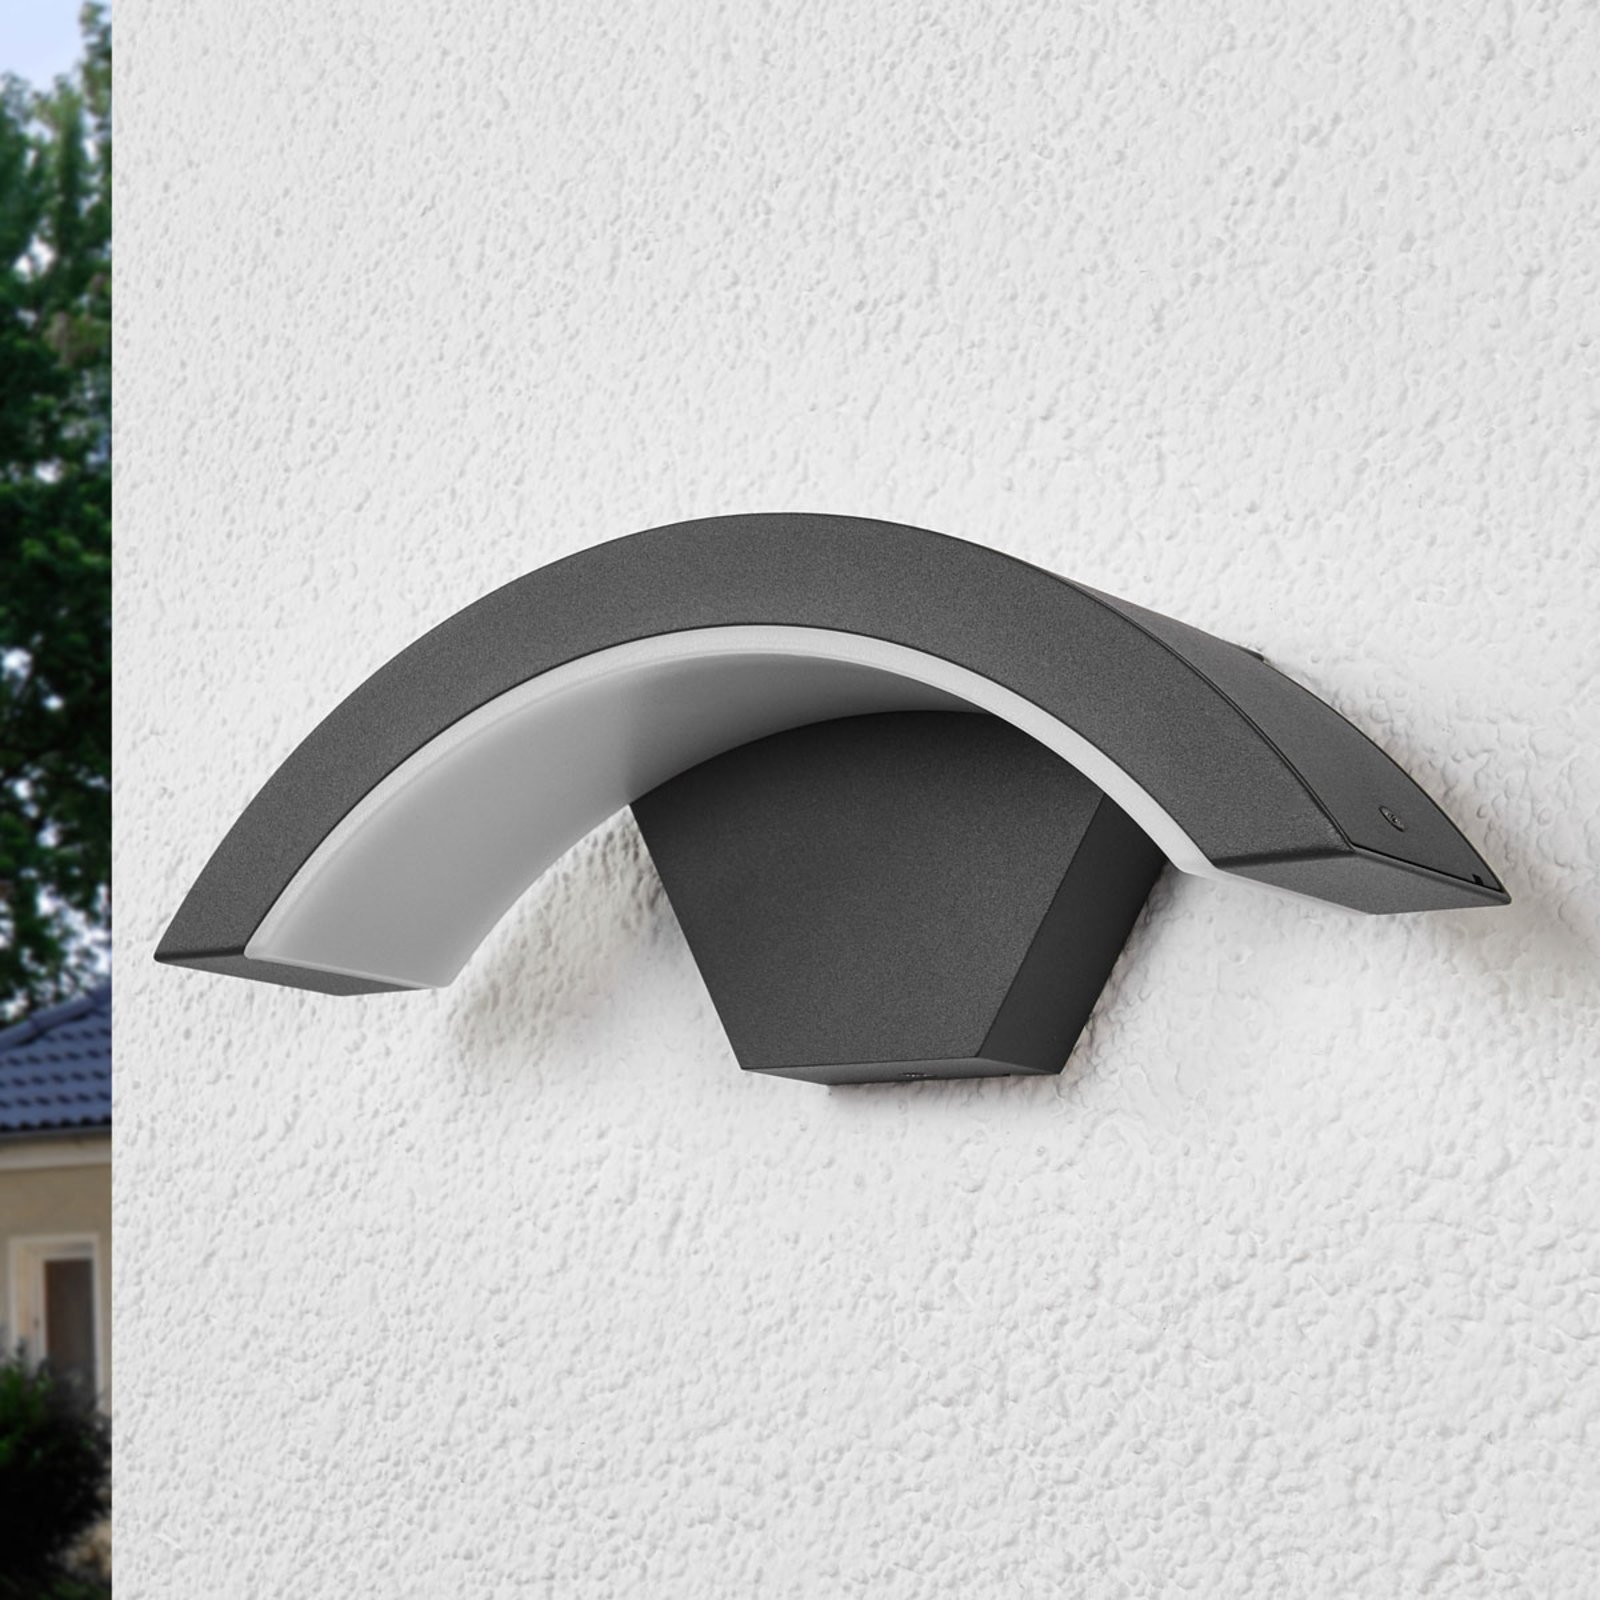 Curved LED outdoor wall light Jule